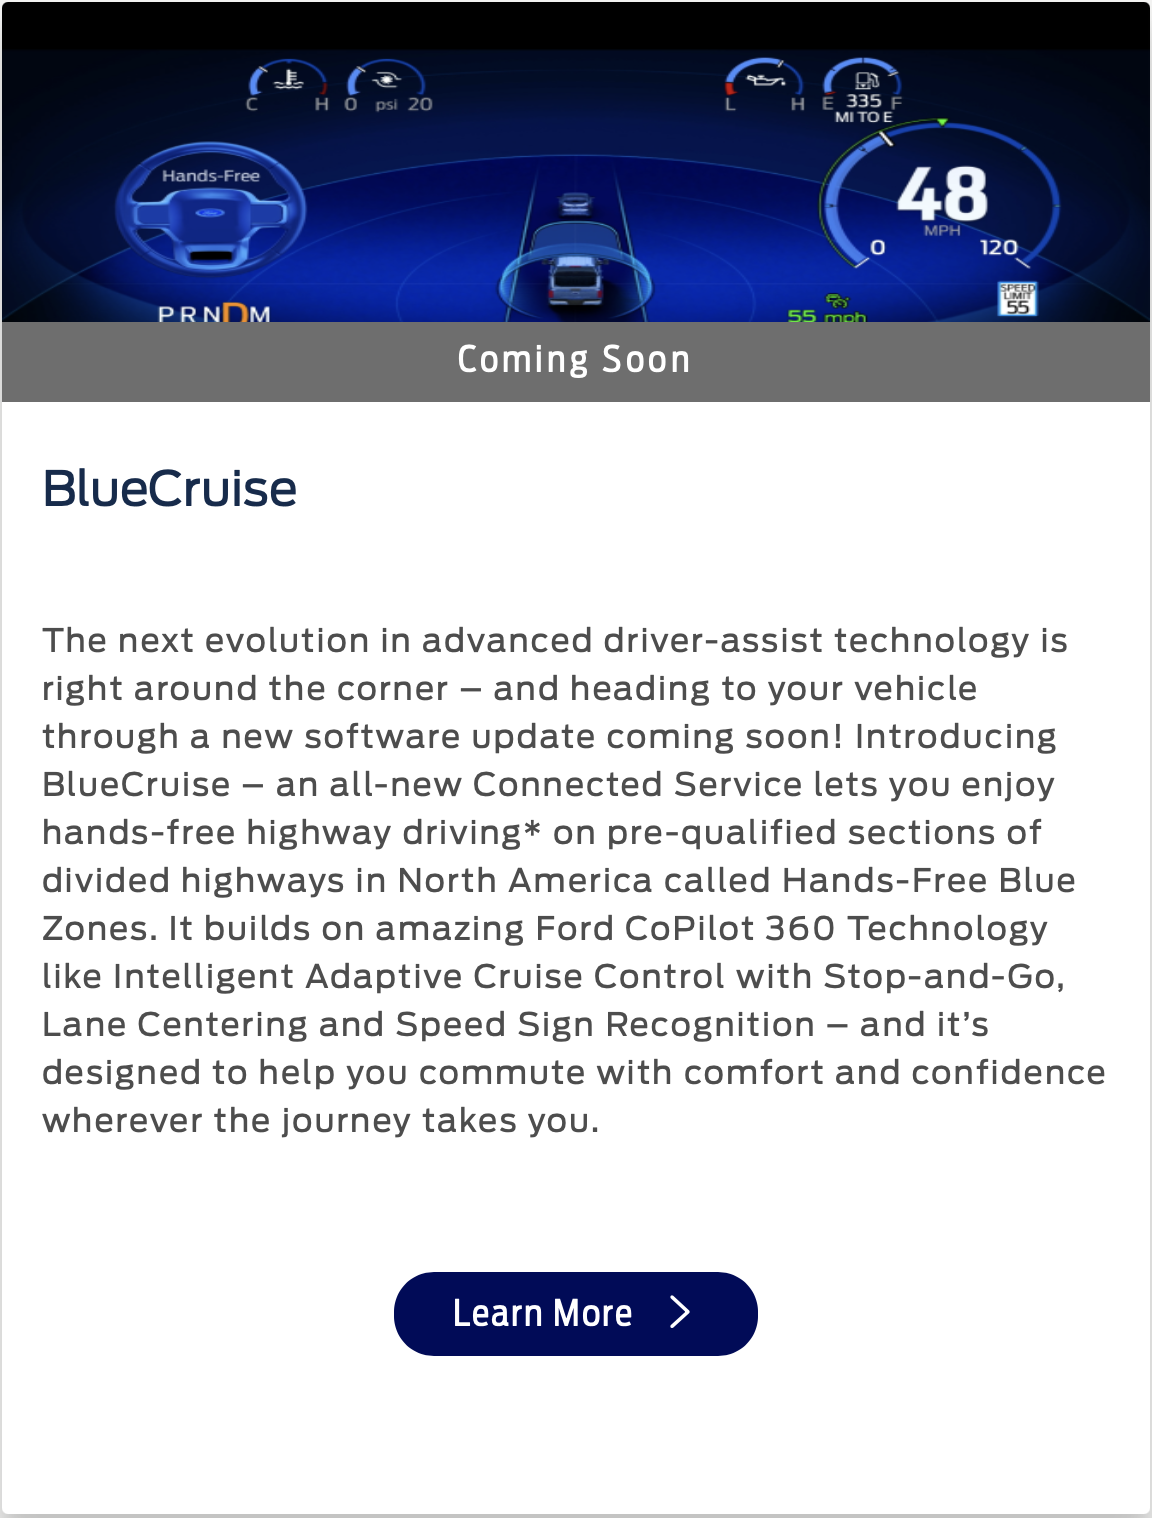 Ford Mustang Mach-E BlueCruise appears in Connected Services Screen Shot 2021-07-28 at 12.28.34 PM